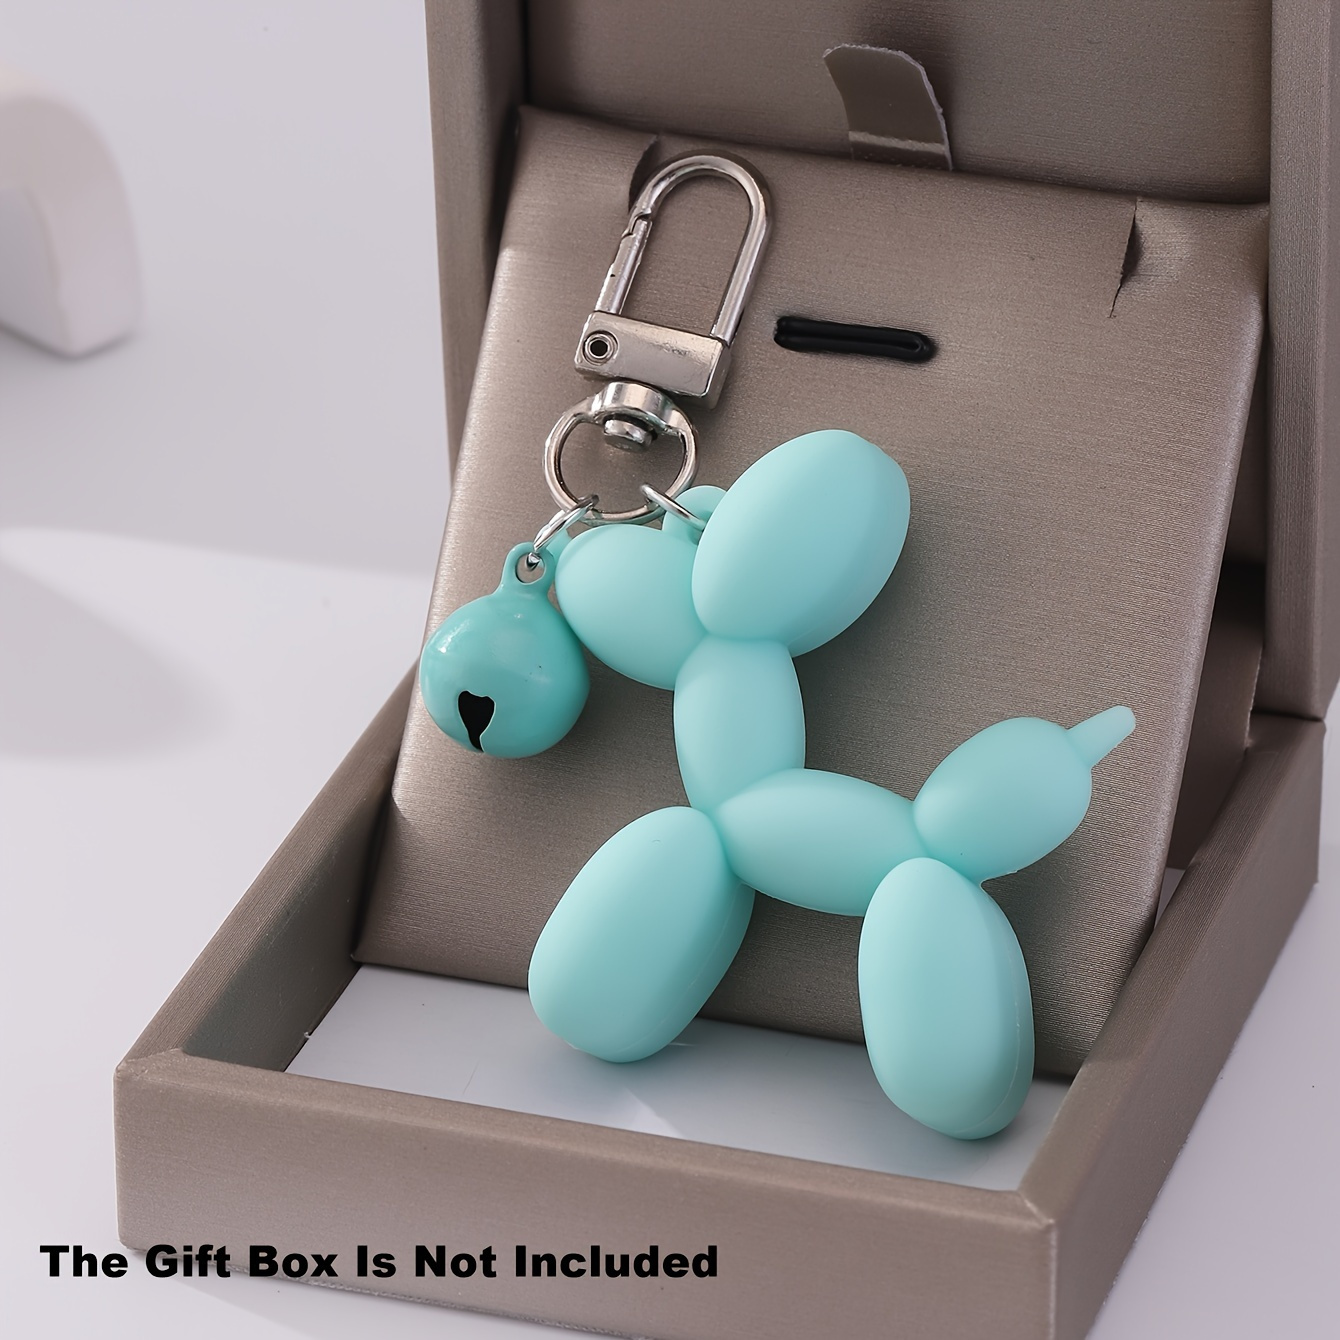 

1pc Cute Balloon Dog Keychain Cartoon Animal Pvc Doll Key Chain Ring Bag Backpack Charm Earbud Case Cover Accessories Women Daily Uses Gift